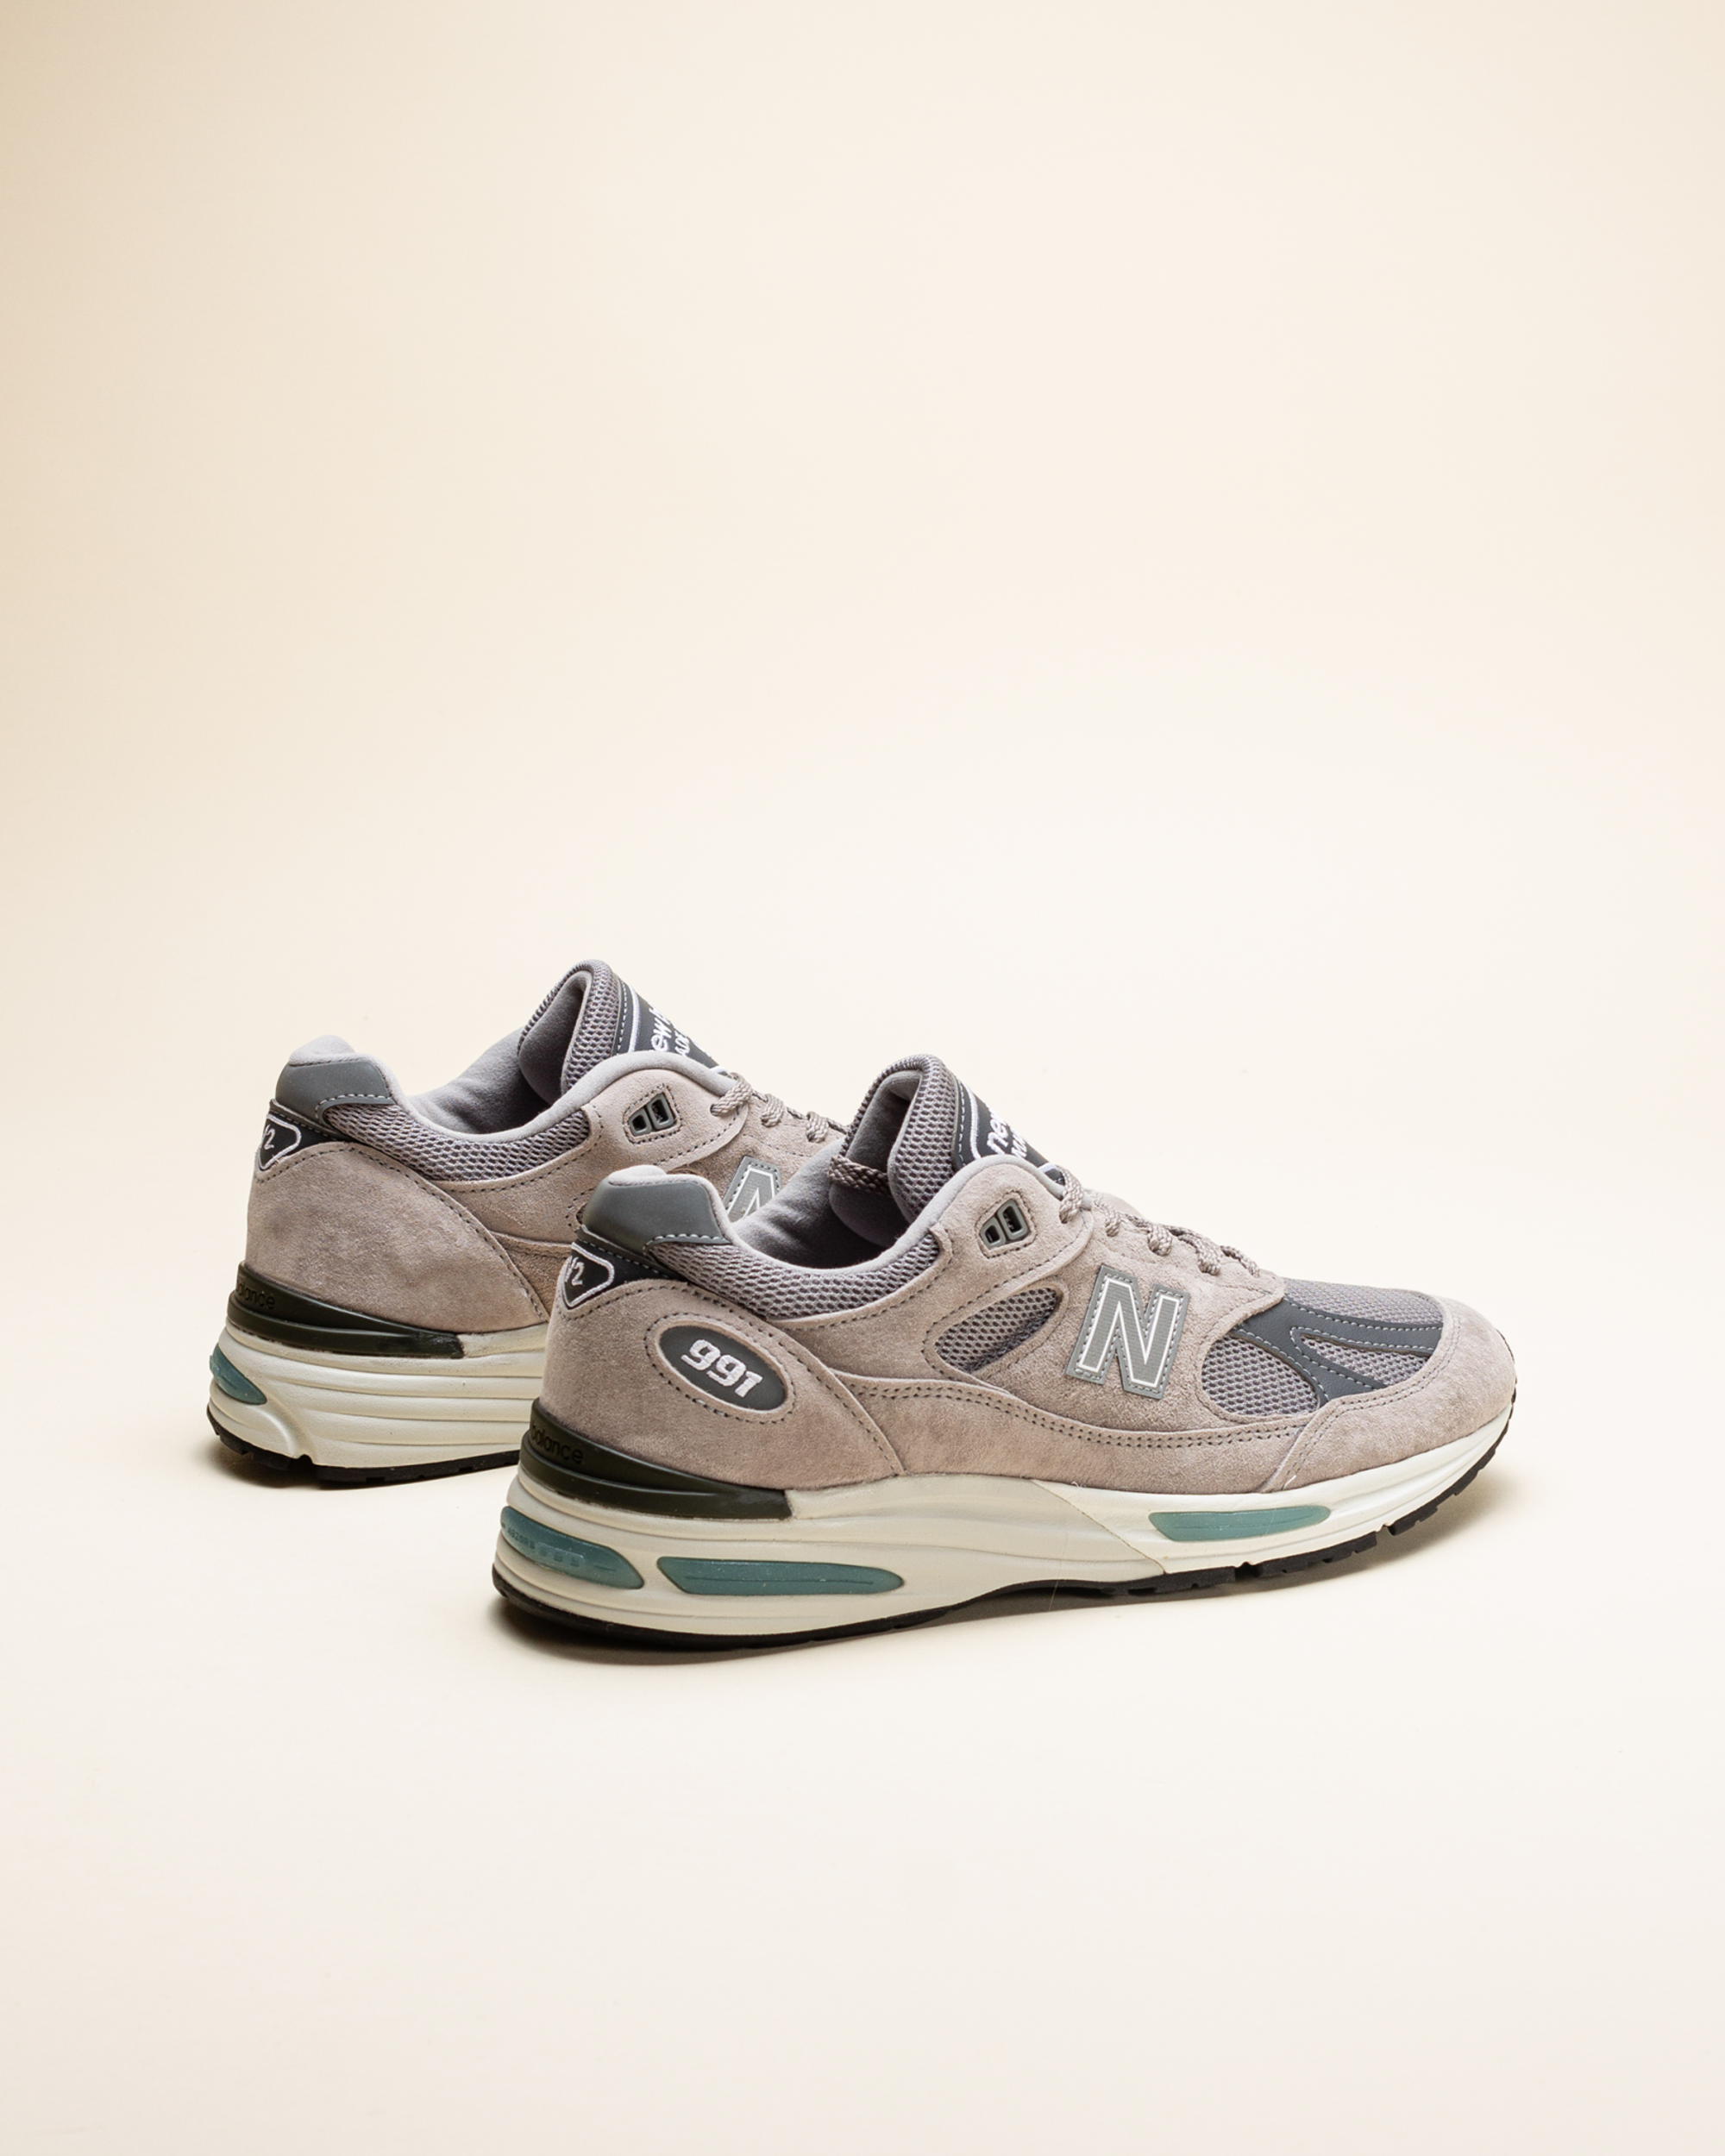 New Balance Made in UK 991v2 - Dove/Alloy/Silver